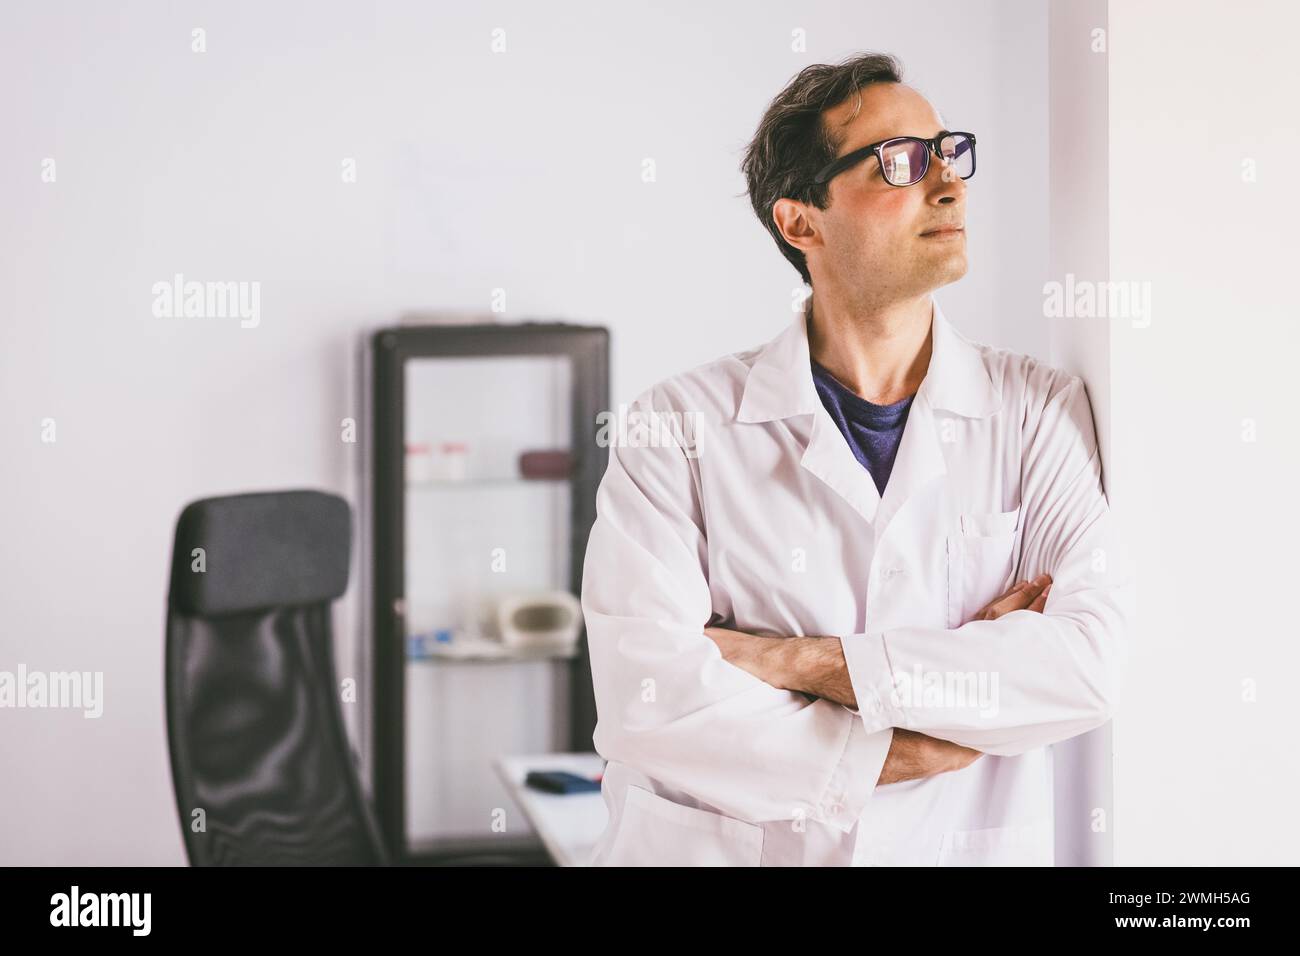 An adult male Caucasian scientist in glasses and a white coat stands and looks forward against the backdrop of a laboratory. Stock Photo